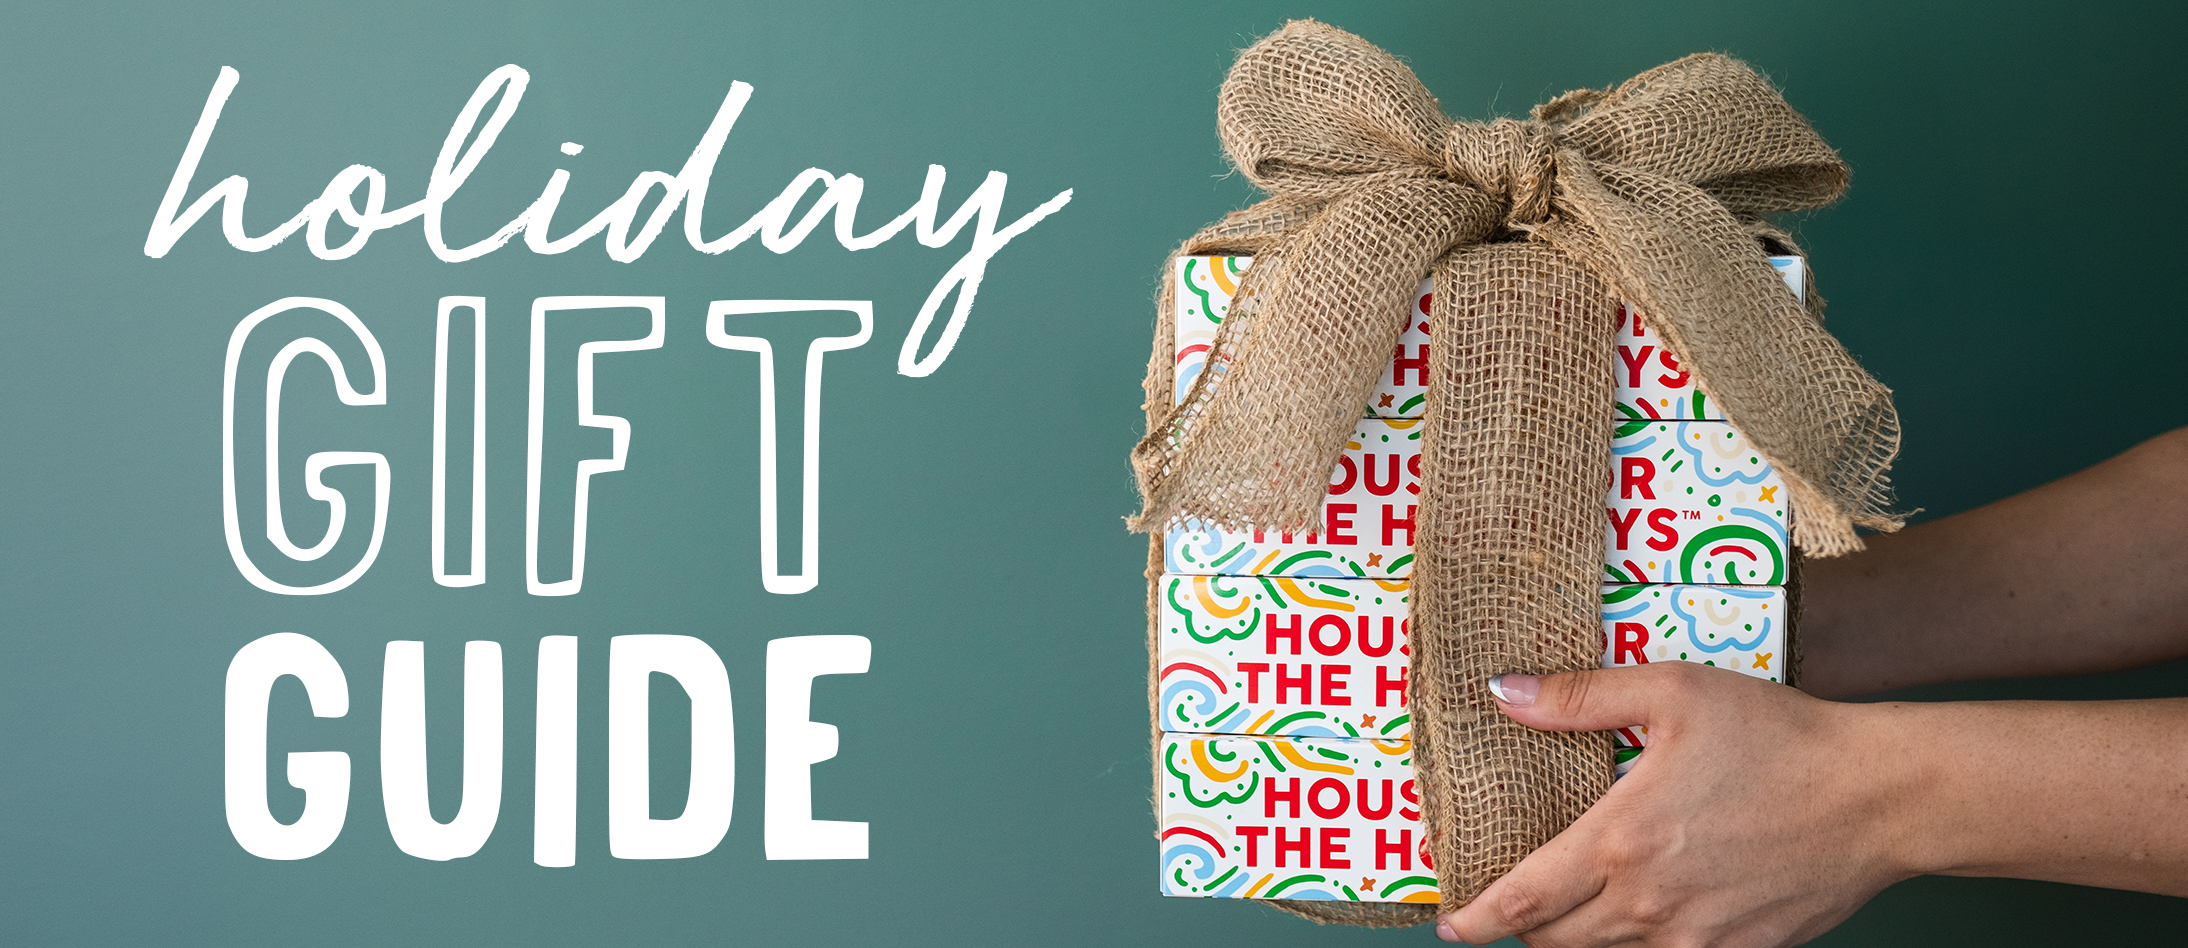 Spreading Holiday Cheer with Lazy Dog's Gift Guide